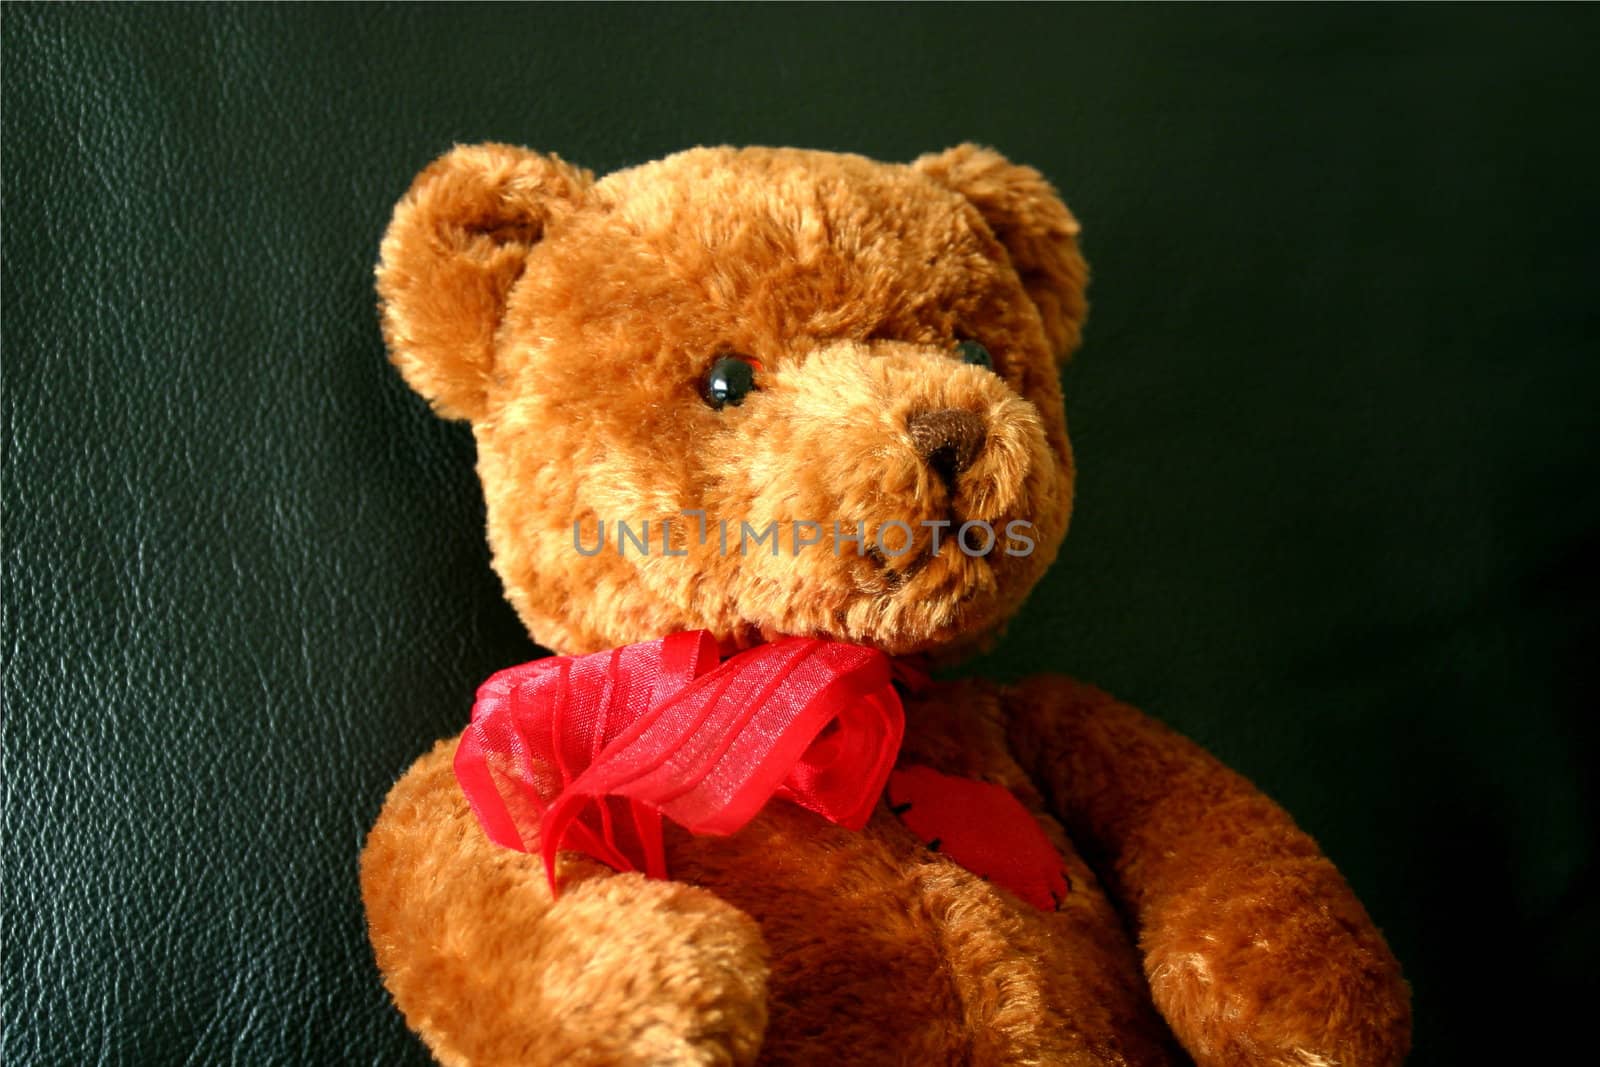 Soft brown teddy bear on a black leather couch with a red heart and red neckerchief. 